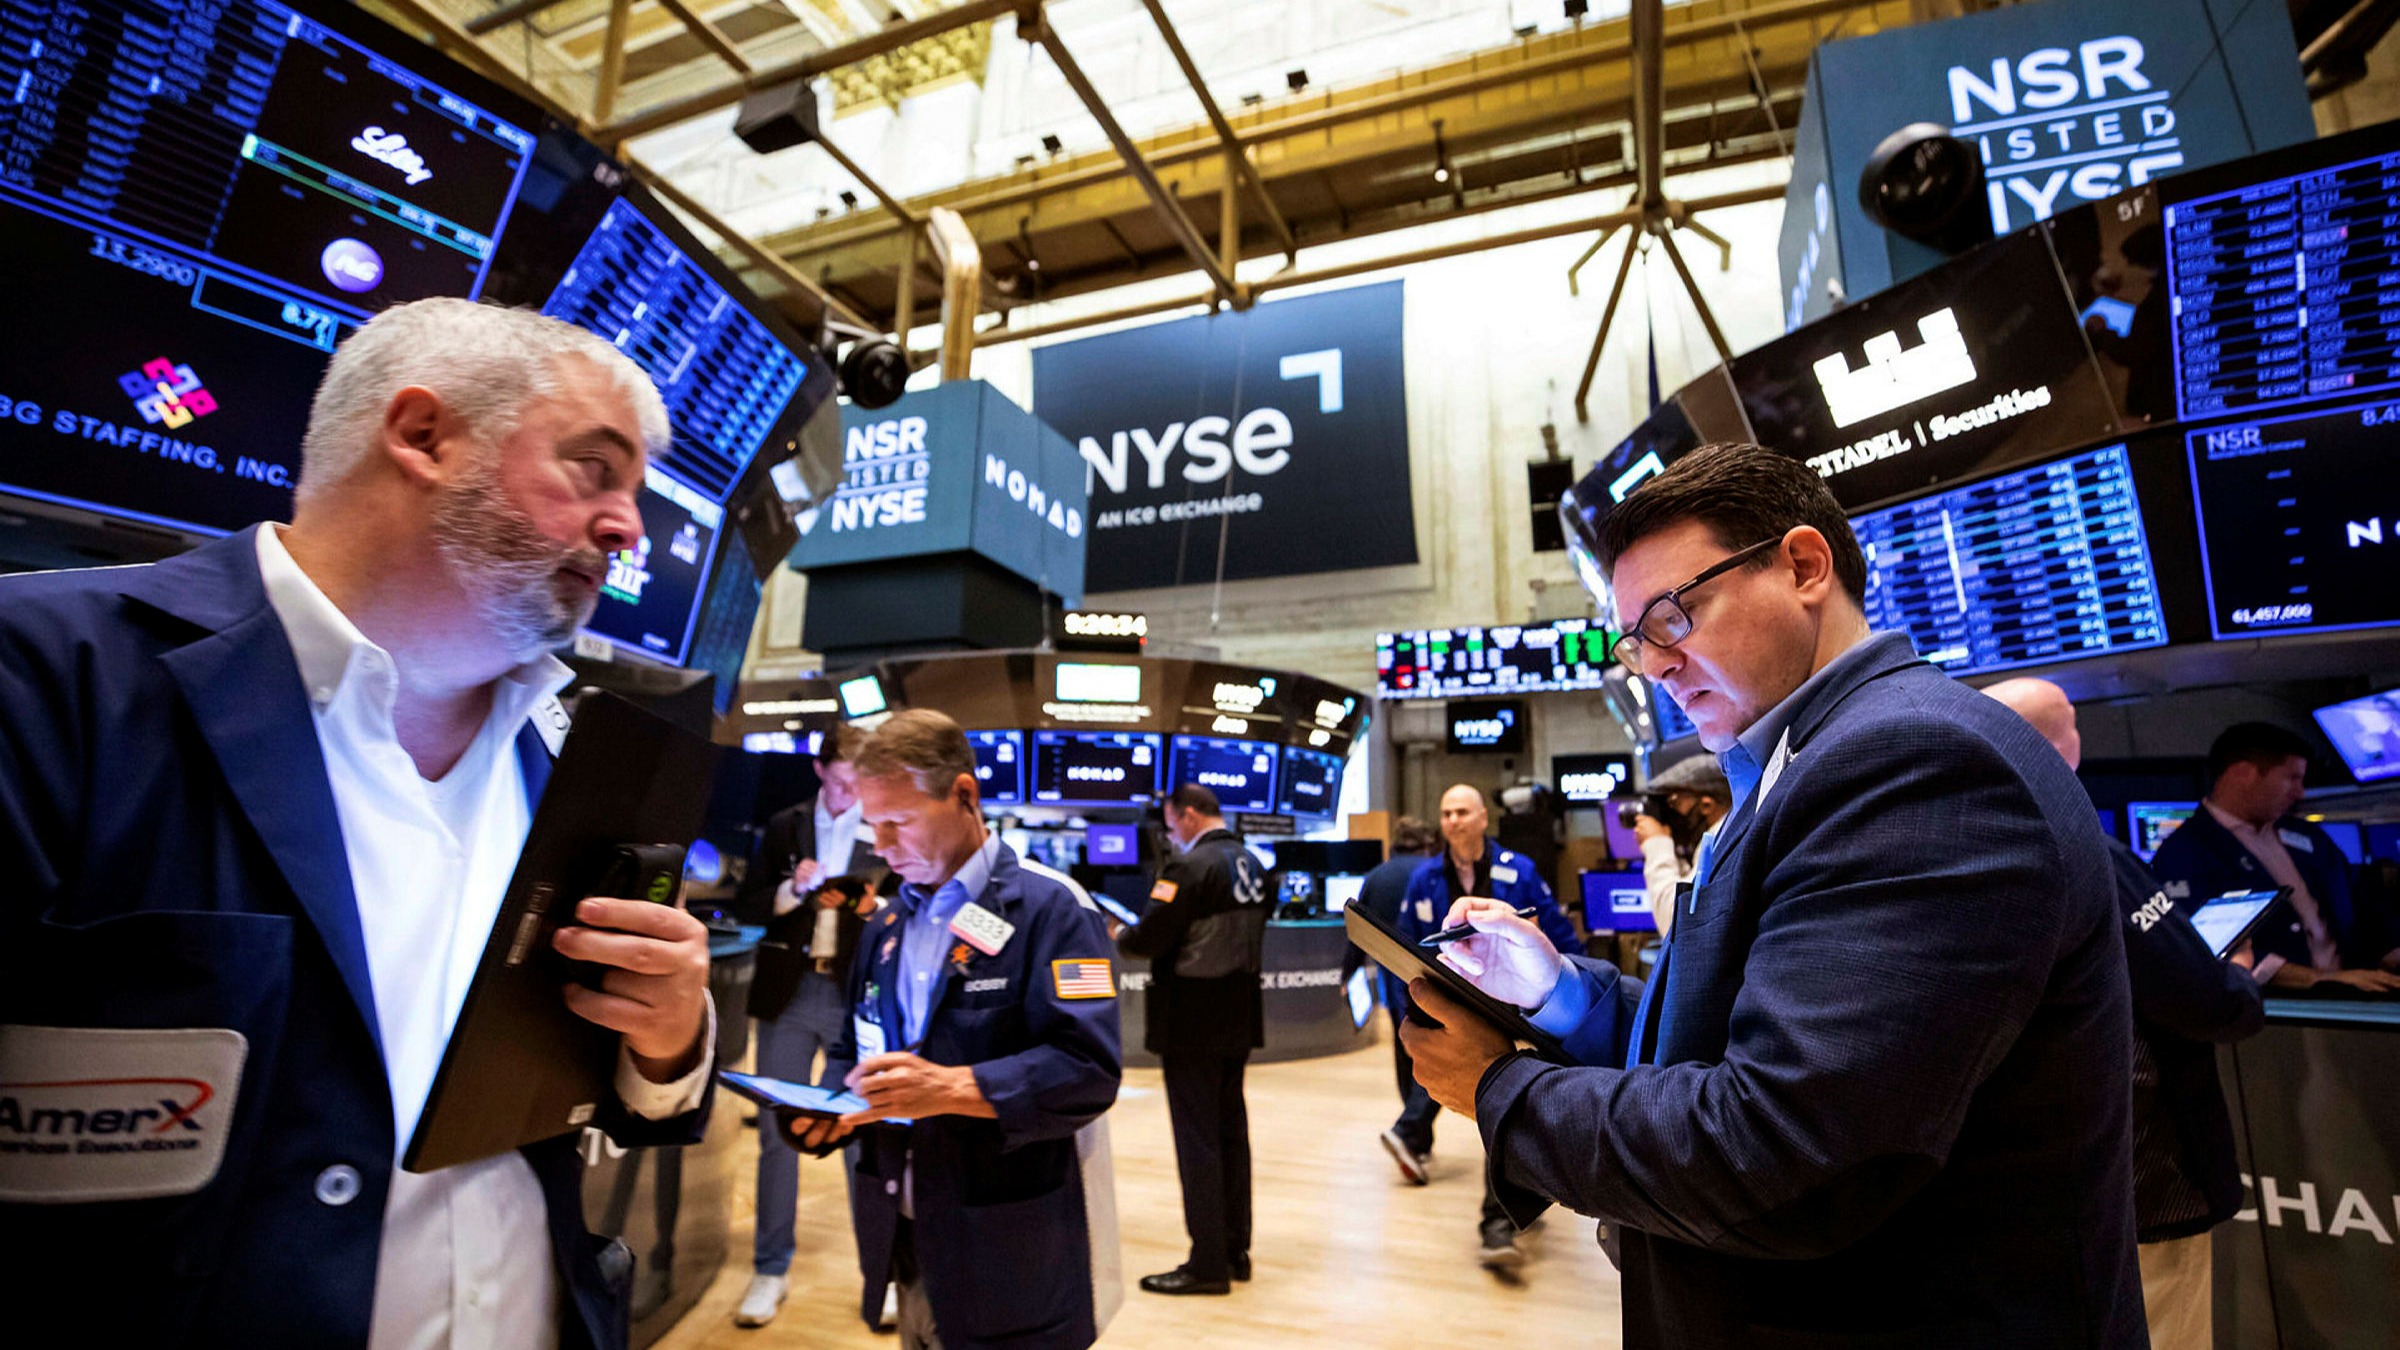 Hacia avance política FirstFT: Wall Street braced for further stock market falls | Financial Times